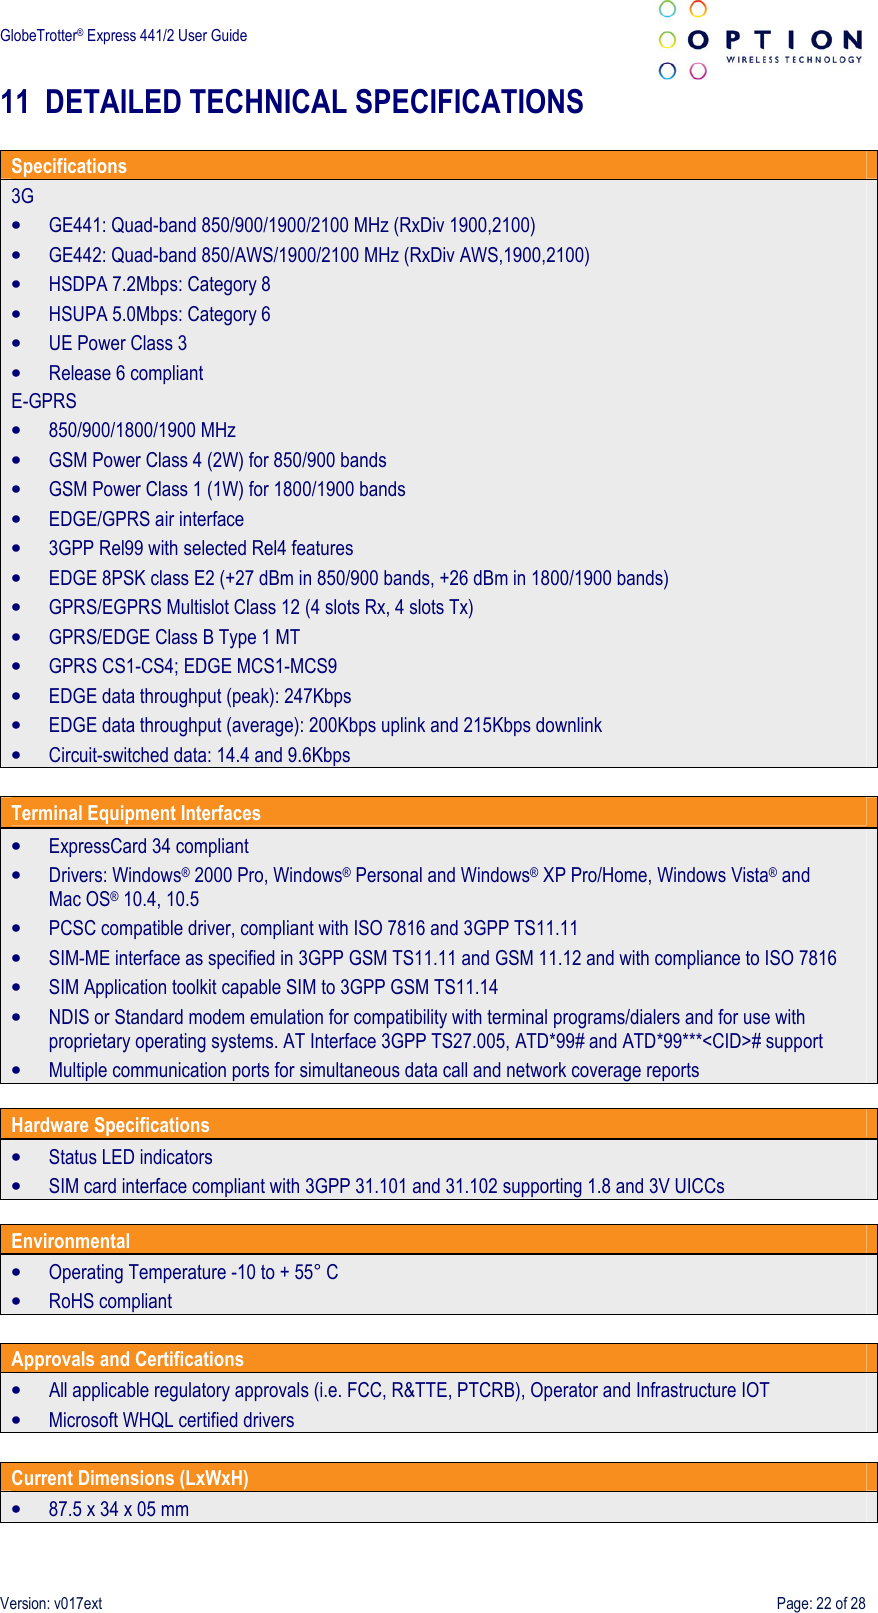  GlobeTrotter® Express 441/2 User Guide    Version: v017ext  Page: 22 of 28 11 DETAILED TECHNICAL SPECIFICATIONS  Specifications 3G • GE441: Quad-band 850/900/1900/2100 MHz (RxDiv 1900,2100) • GE442: Quad-band 850/AWS/1900/2100 MHz (RxDiv AWS,1900,2100) • HSDPA 7.2Mbps: Category 8 • HSUPA 5.0Mbps: Category 6 • UE Power Class 3 • Release 6 compliant E-GPRS • 850/900/1800/1900 MHz • GSM Power Class 4 (2W) for 850/900 bands • GSM Power Class 1 (1W) for 1800/1900 bands • EDGE/GPRS air interface • 3GPP Rel99 with selected Rel4 features • EDGE 8PSK class E2 (+27 dBm in 850/900 bands, +26 dBm in 1800/1900 bands) • GPRS/EGPRS Multislot Class 12 (4 slots Rx, 4 slots Tx) • GPRS/EDGE Class B Type 1 MT • GPRS CS1-CS4; EDGE MCS1-MCS9 • EDGE data throughput (peak): 247Kbps • EDGE data throughput (average): 200Kbps uplink and 215Kbps downlink • Circuit-switched data: 14.4 and 9.6Kbps  Terminal Equipment Interfaces • ExpressCard 34 compliant • Drivers: Windows® 2000 Pro, Windows® Personal and Windows® XP Pro/Home, Windows Vista® and Mac OS® 10.4, 10.5 • PCSC compatible driver, compliant with ISO 7816 and 3GPP TS11.11 • SIM-ME interface as specified in 3GPP GSM TS11.11 and GSM 11.12 and with compliance to ISO 7816 • SIM Application toolkit capable SIM to 3GPP GSM TS11.14 • NDIS or Standard modem emulation for compatibility with terminal programs/dialers and for use with proprietary operating systems. AT Interface 3GPP TS27.005, ATD*99# and ATD*99***&lt;CID&gt;# support • Multiple communication ports for simultaneous data call and network coverage reports  Hardware Specifications • Status LED indicators • SIM card interface compliant with 3GPP 31.101 and 31.102 supporting 1.8 and 3V UICCs  Environmental • Operating Temperature -10 to + 55° C • RoHS compliant  Approvals and Certifications • All applicable regulatory approvals (i.e. FCC, R&amp;TTE, PTCRB), Operator and Infrastructure IOT • Microsoft WHQL certified drivers  Current Dimensions (LxWxH) • 87.5 x 34 x 05 mm 